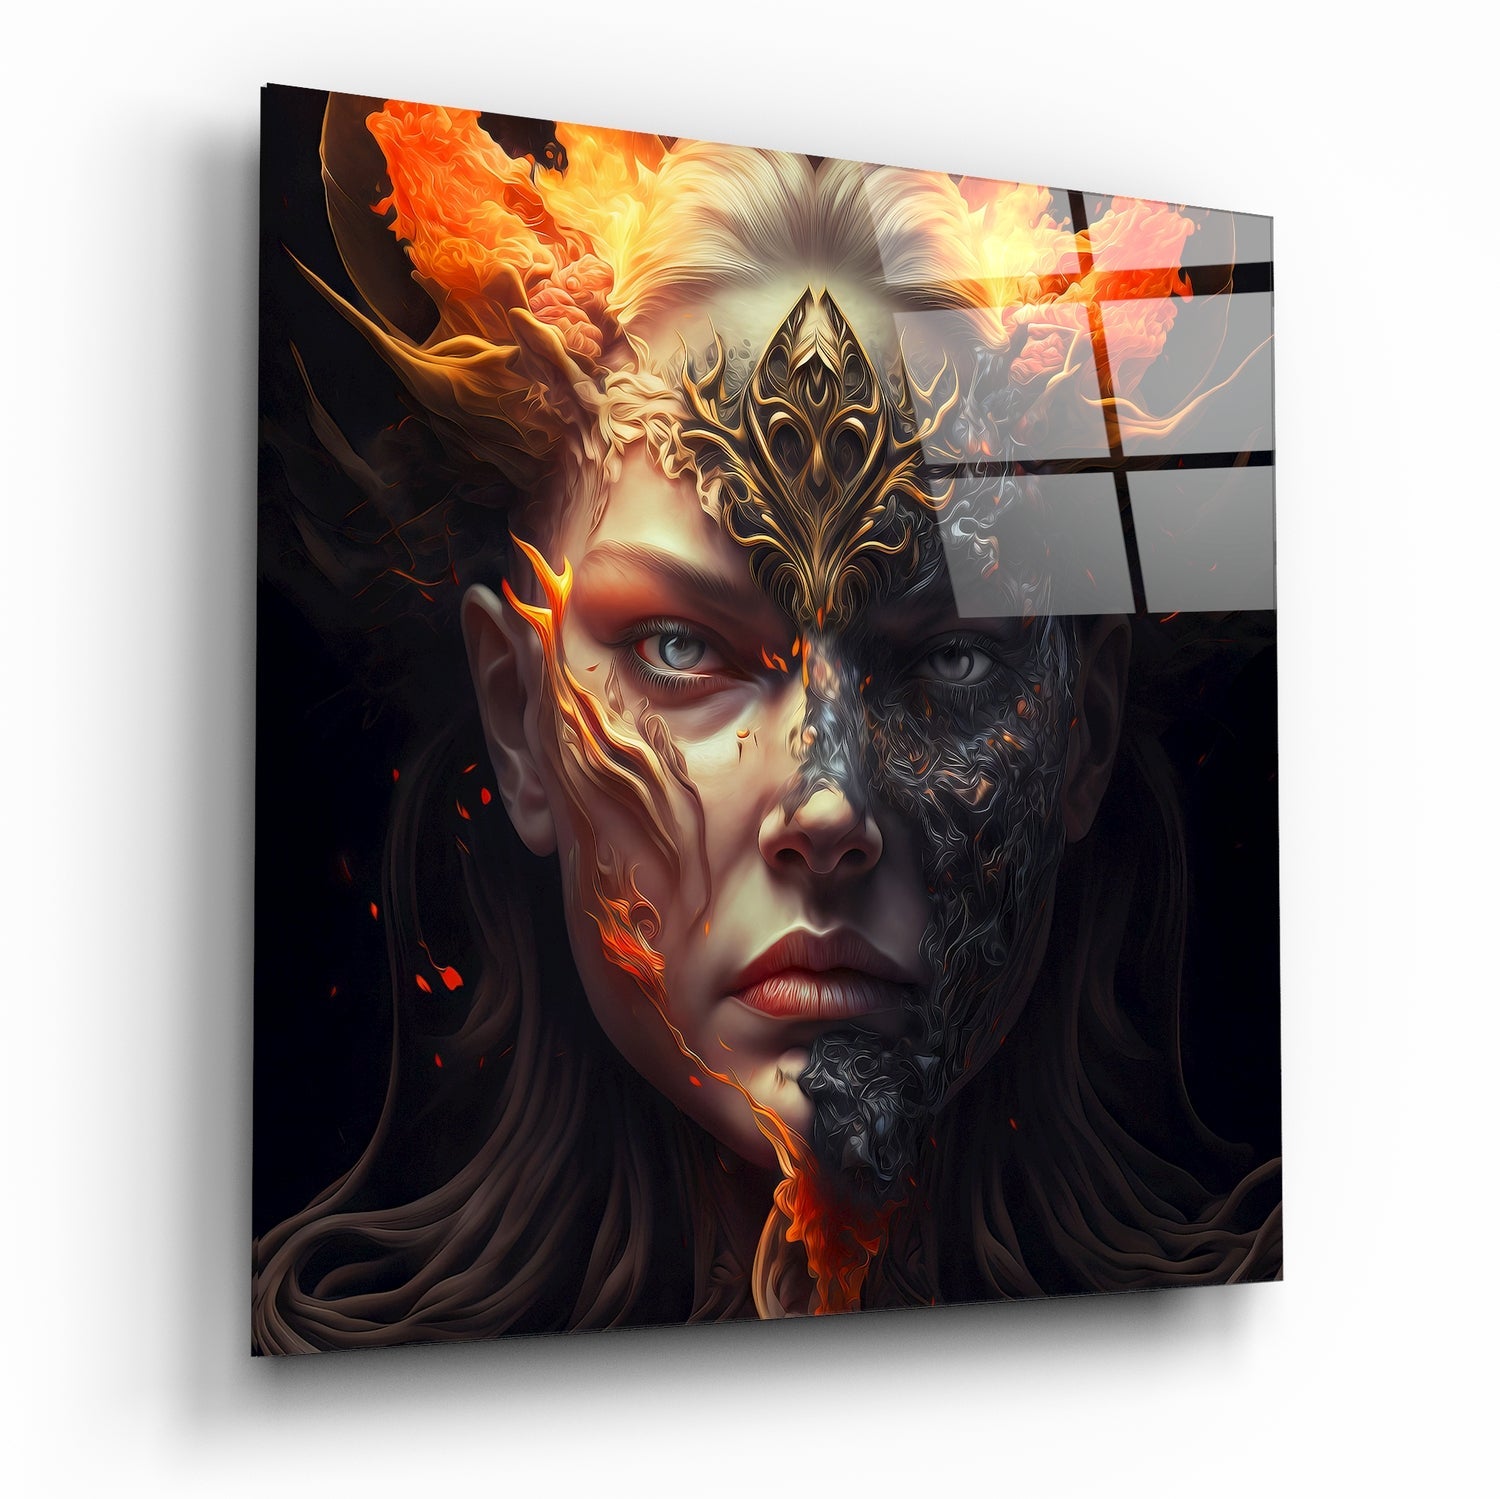 The Wrath of the Woman Glass Wall Art  || Designer Collection | Insigne Art Design